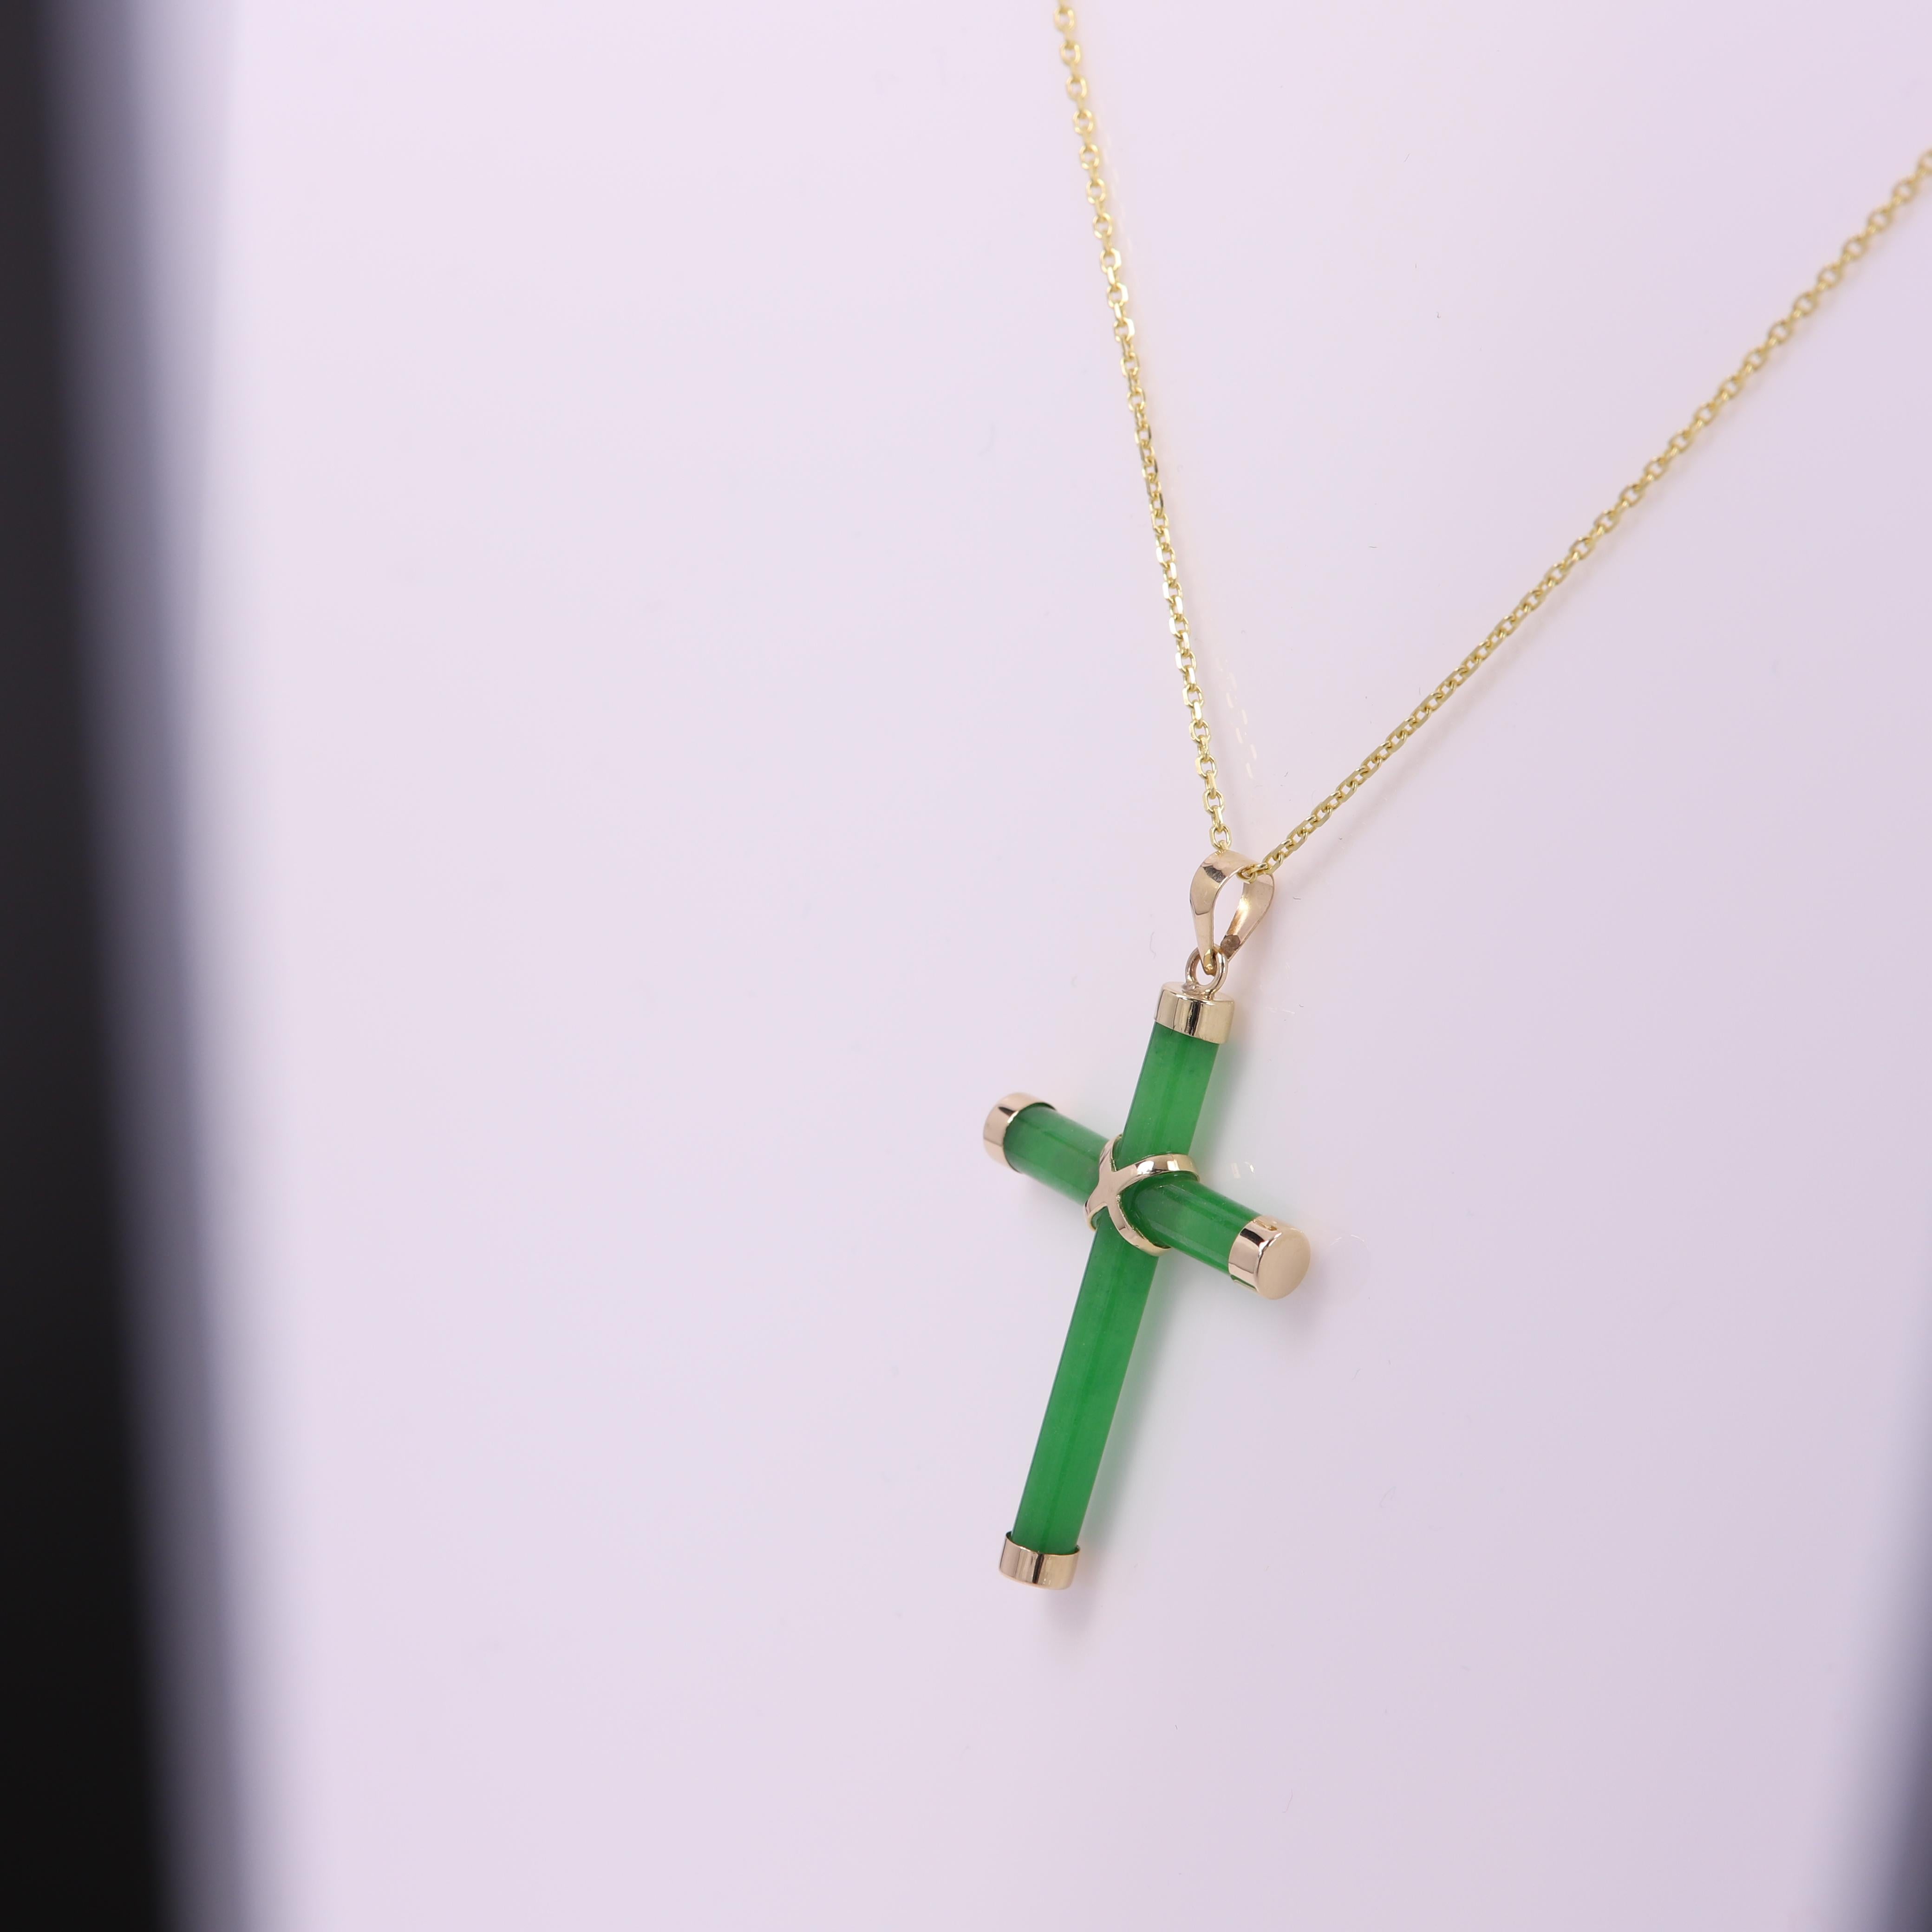 Beautiful Jade Cross
Set with 14k Yellow Gold overall weight 1.7 grams.
Natural Jade that is color treated (treatment is common and popular).
Size: 30 x 20 mm(1.25' inch high, 0.75' Inch wide).
The chain is 14k yellow gold, basic classic link chain